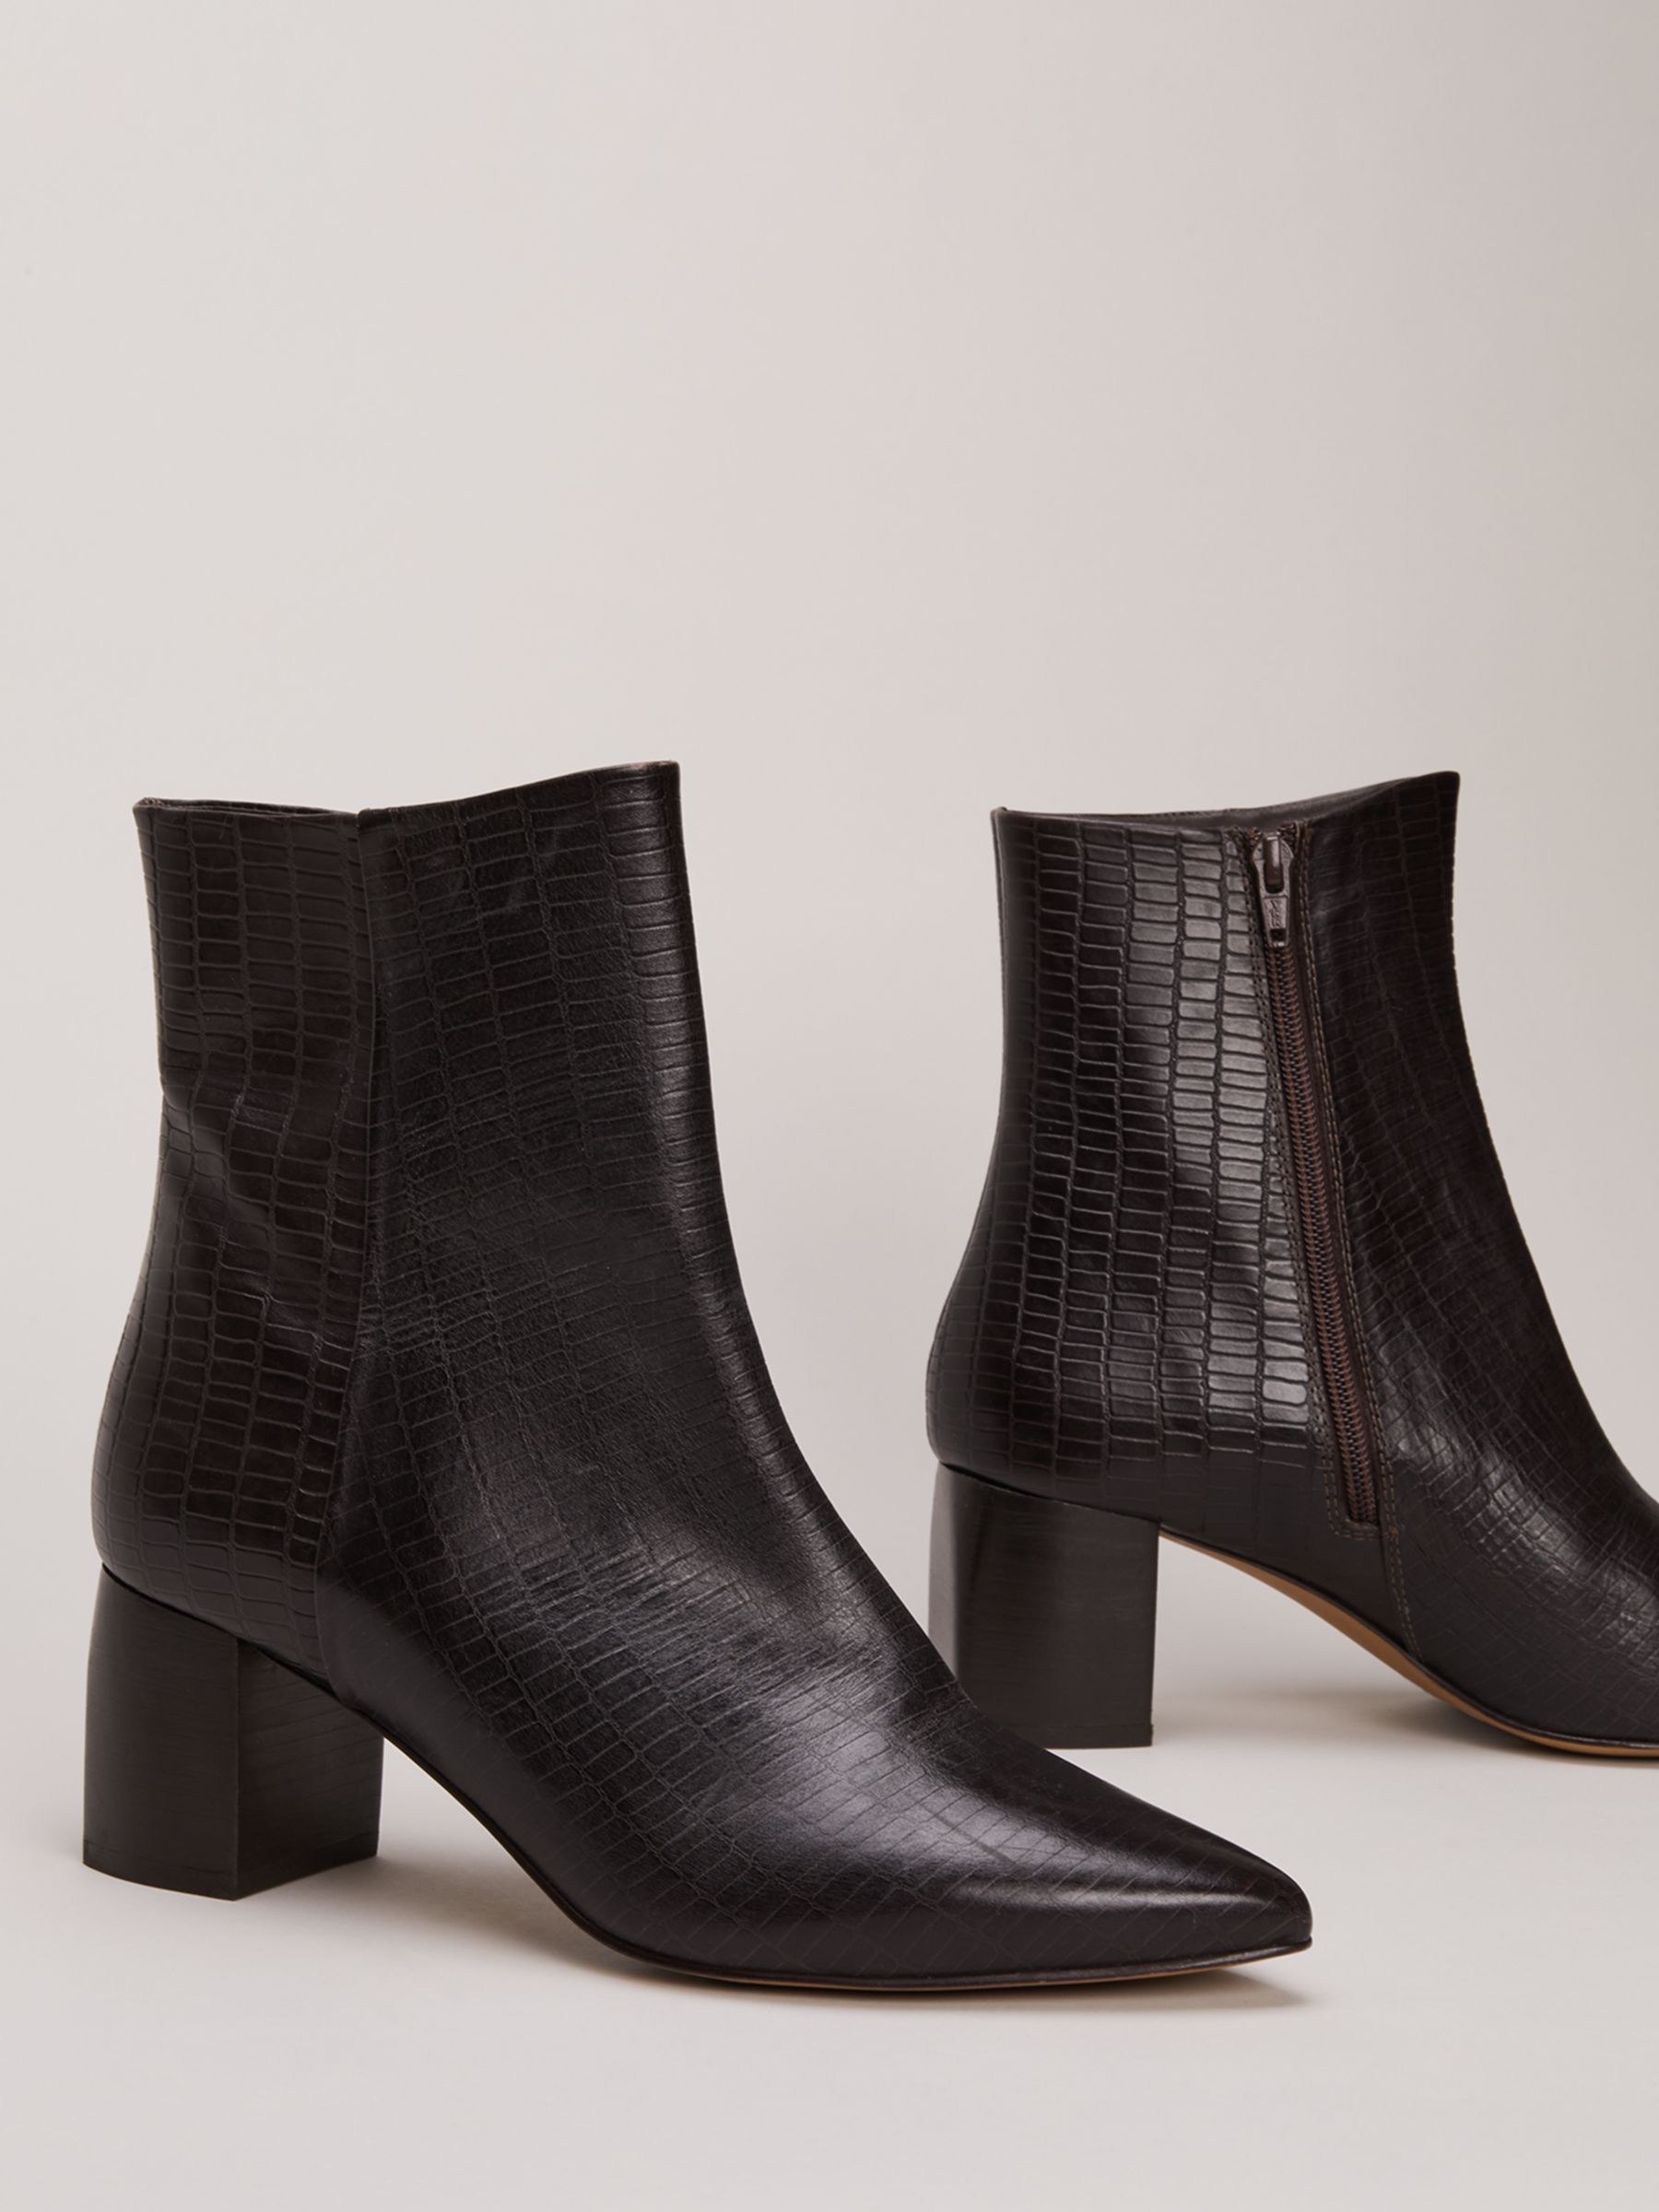 Mango Leather Ankle Boots, Black at John Lewis & Partners